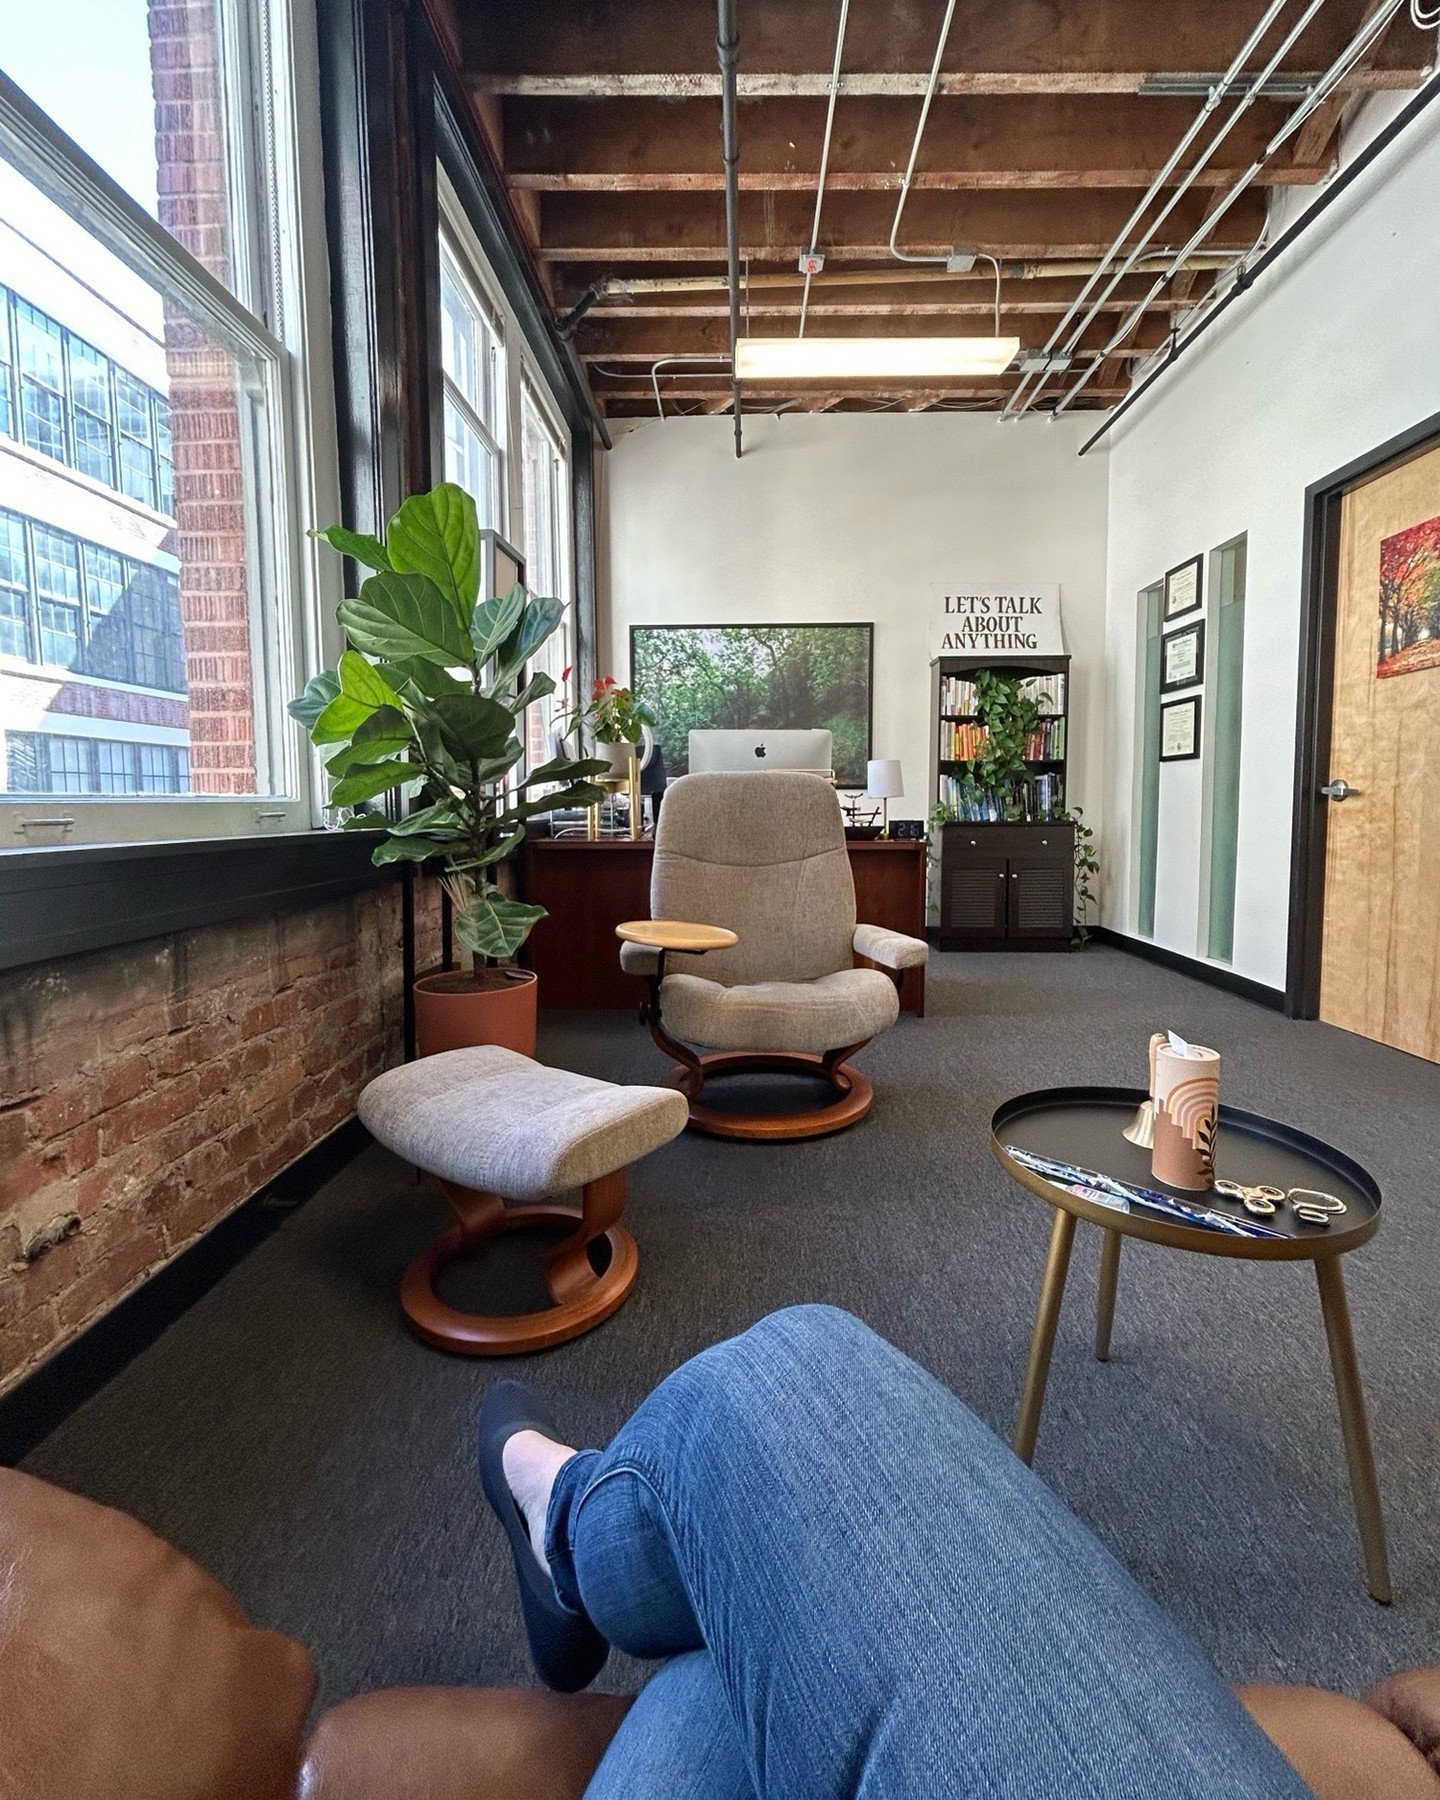 Where the magic happens - therapy and coaching in my Dogpatch/Potrero Hill office in San Francisco 🤩

#therapysf #potrerohill #potrerohillsanfrancisco #dogpatchsf #dogpatch #dogpatchsanfrancisco #designdistrictsf #missionbaysf #missionbay #therapyof